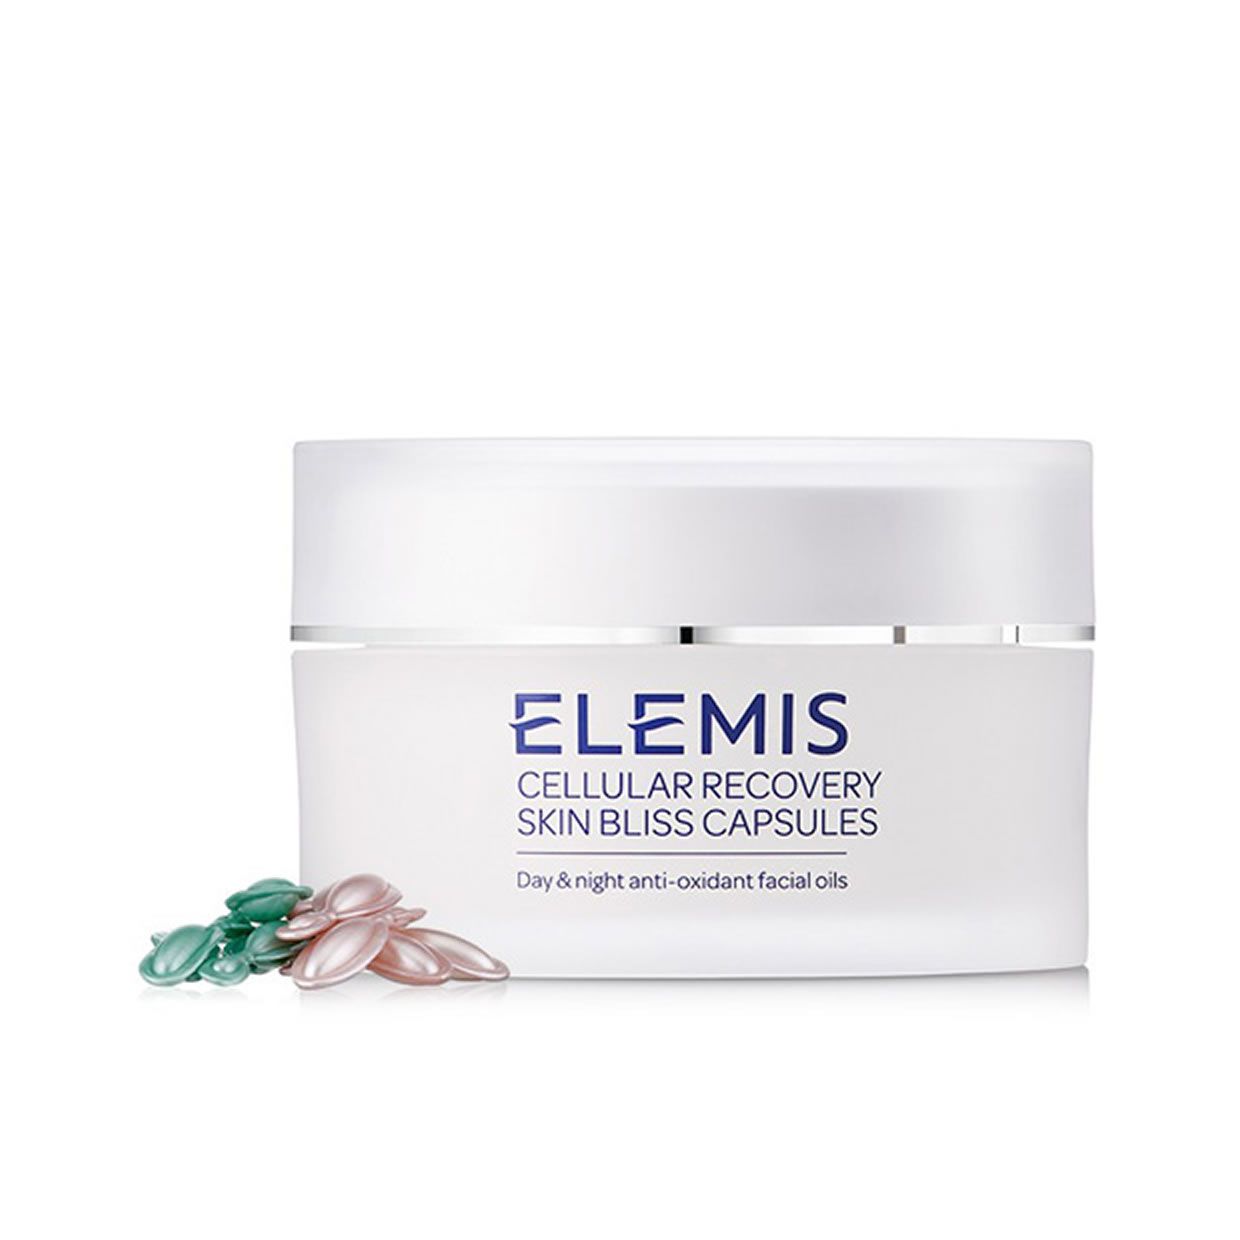 elemis cellular recovery skin bliss capsules